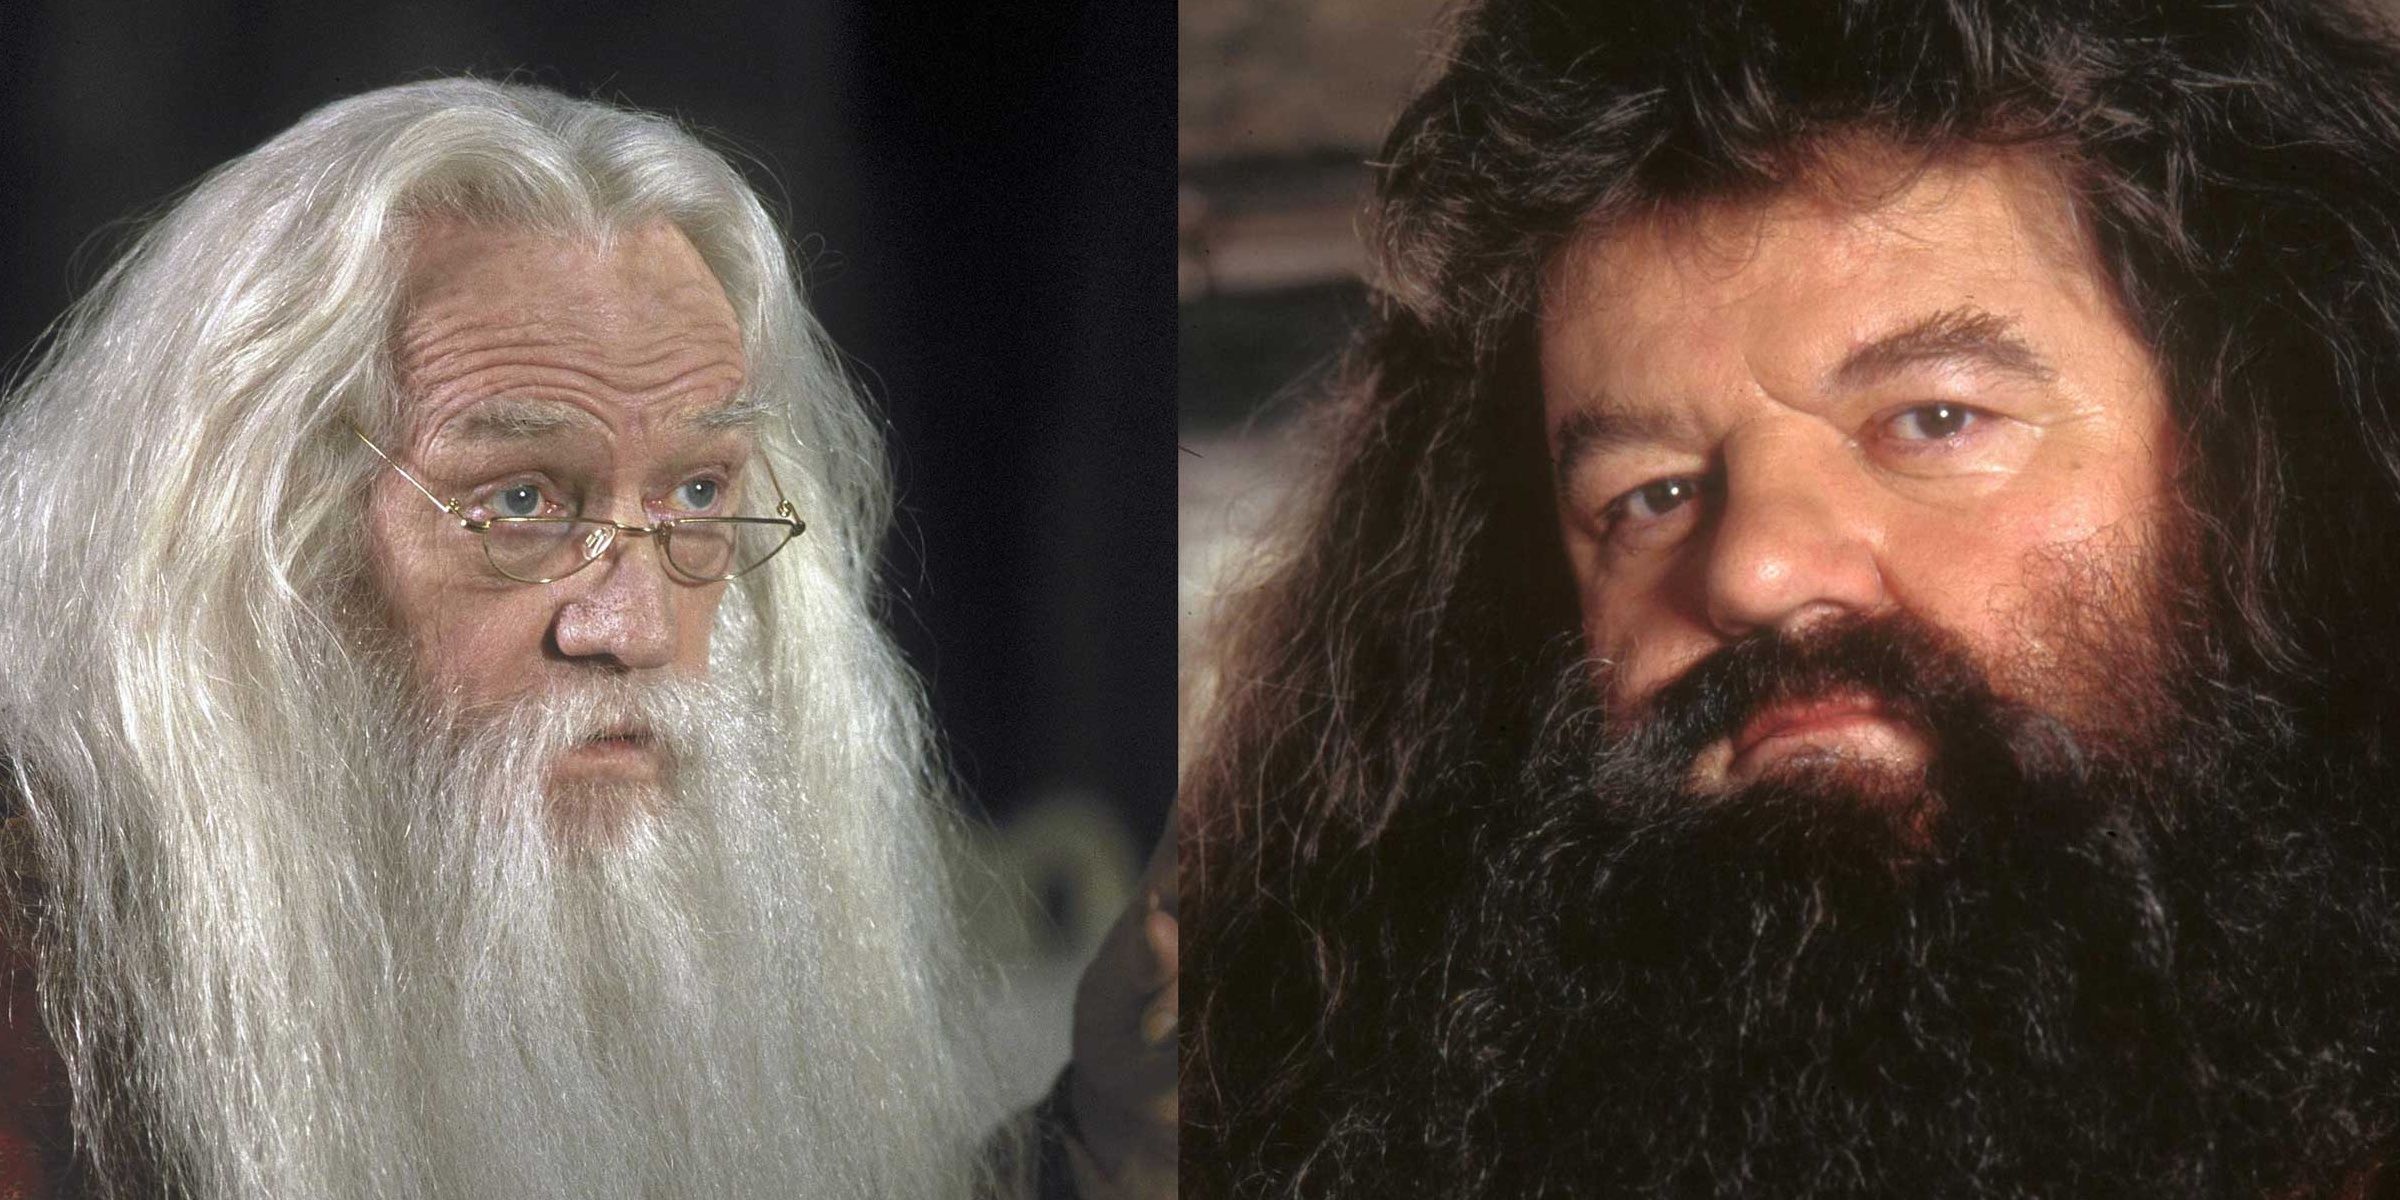 Professor Dumbledore and Hagrid from the Harry Potter franchise